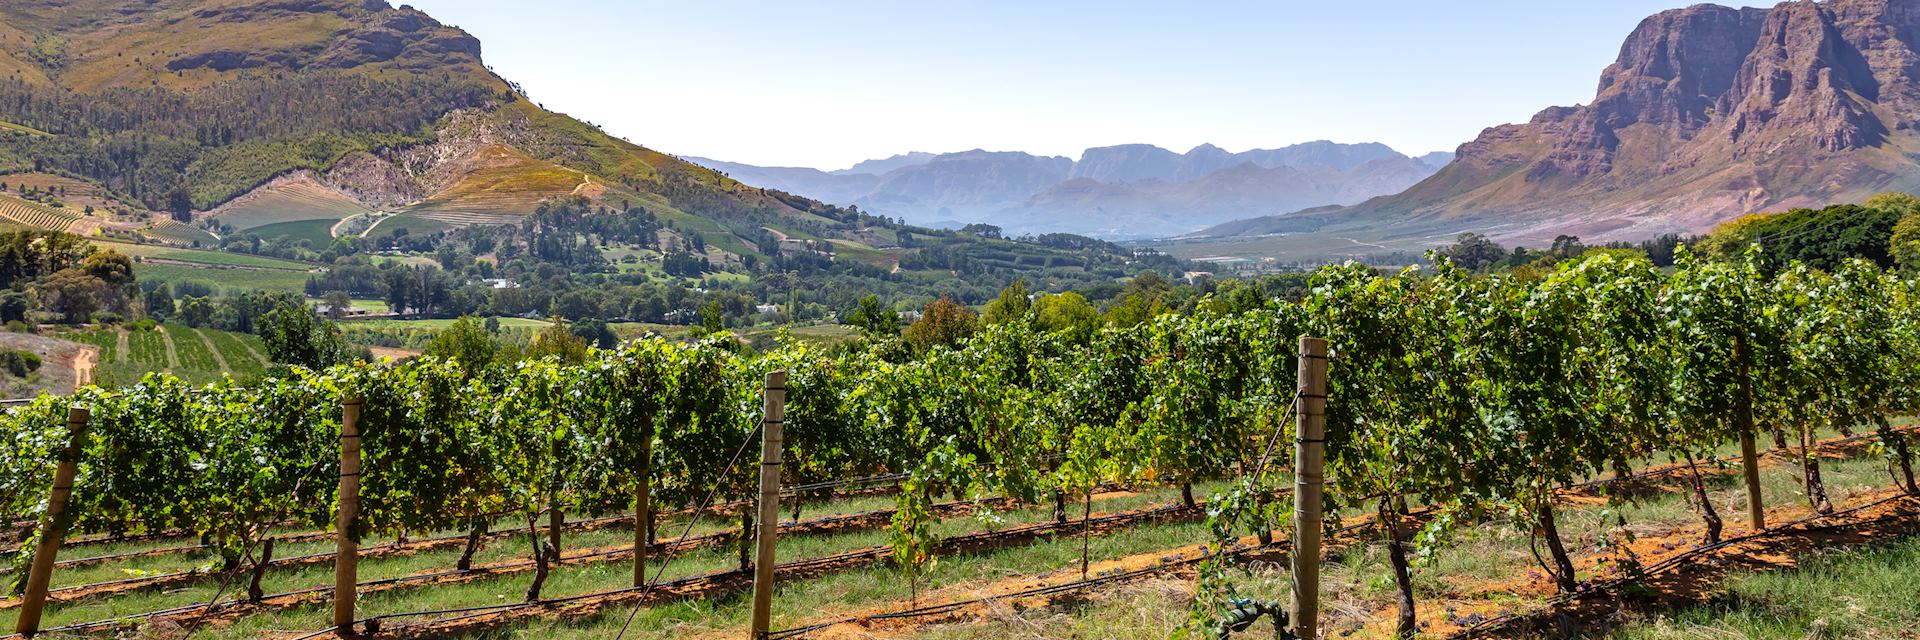 South Africa's Winelands